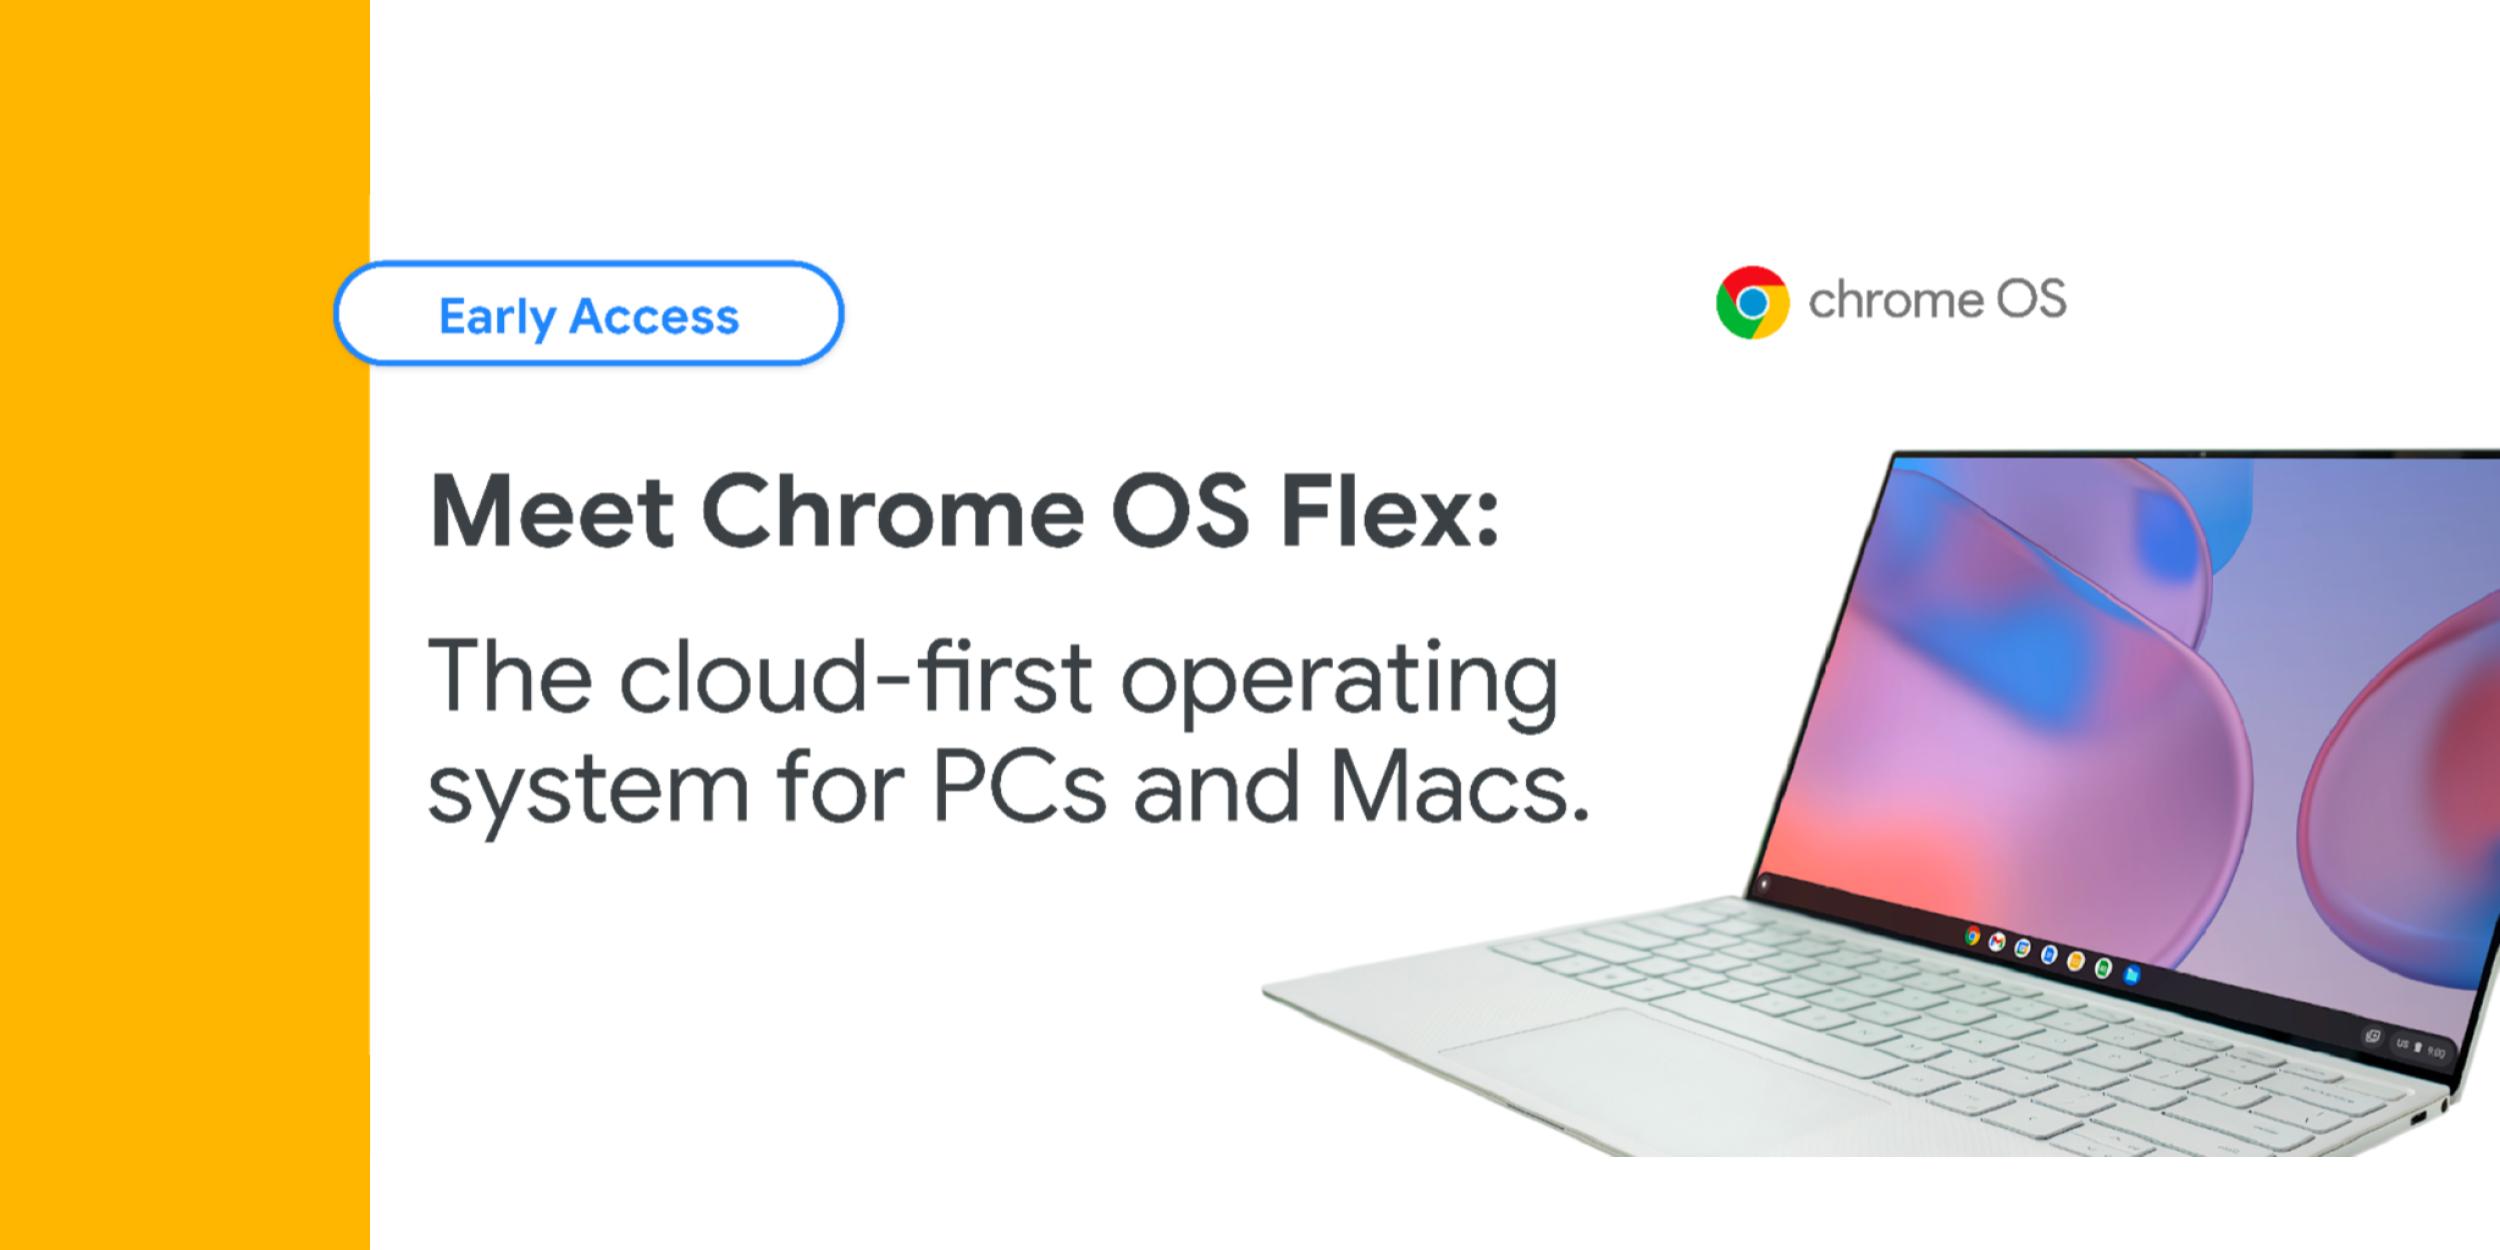 Chrome OS Flex isn’t the solution for Chromebooks past their software support date